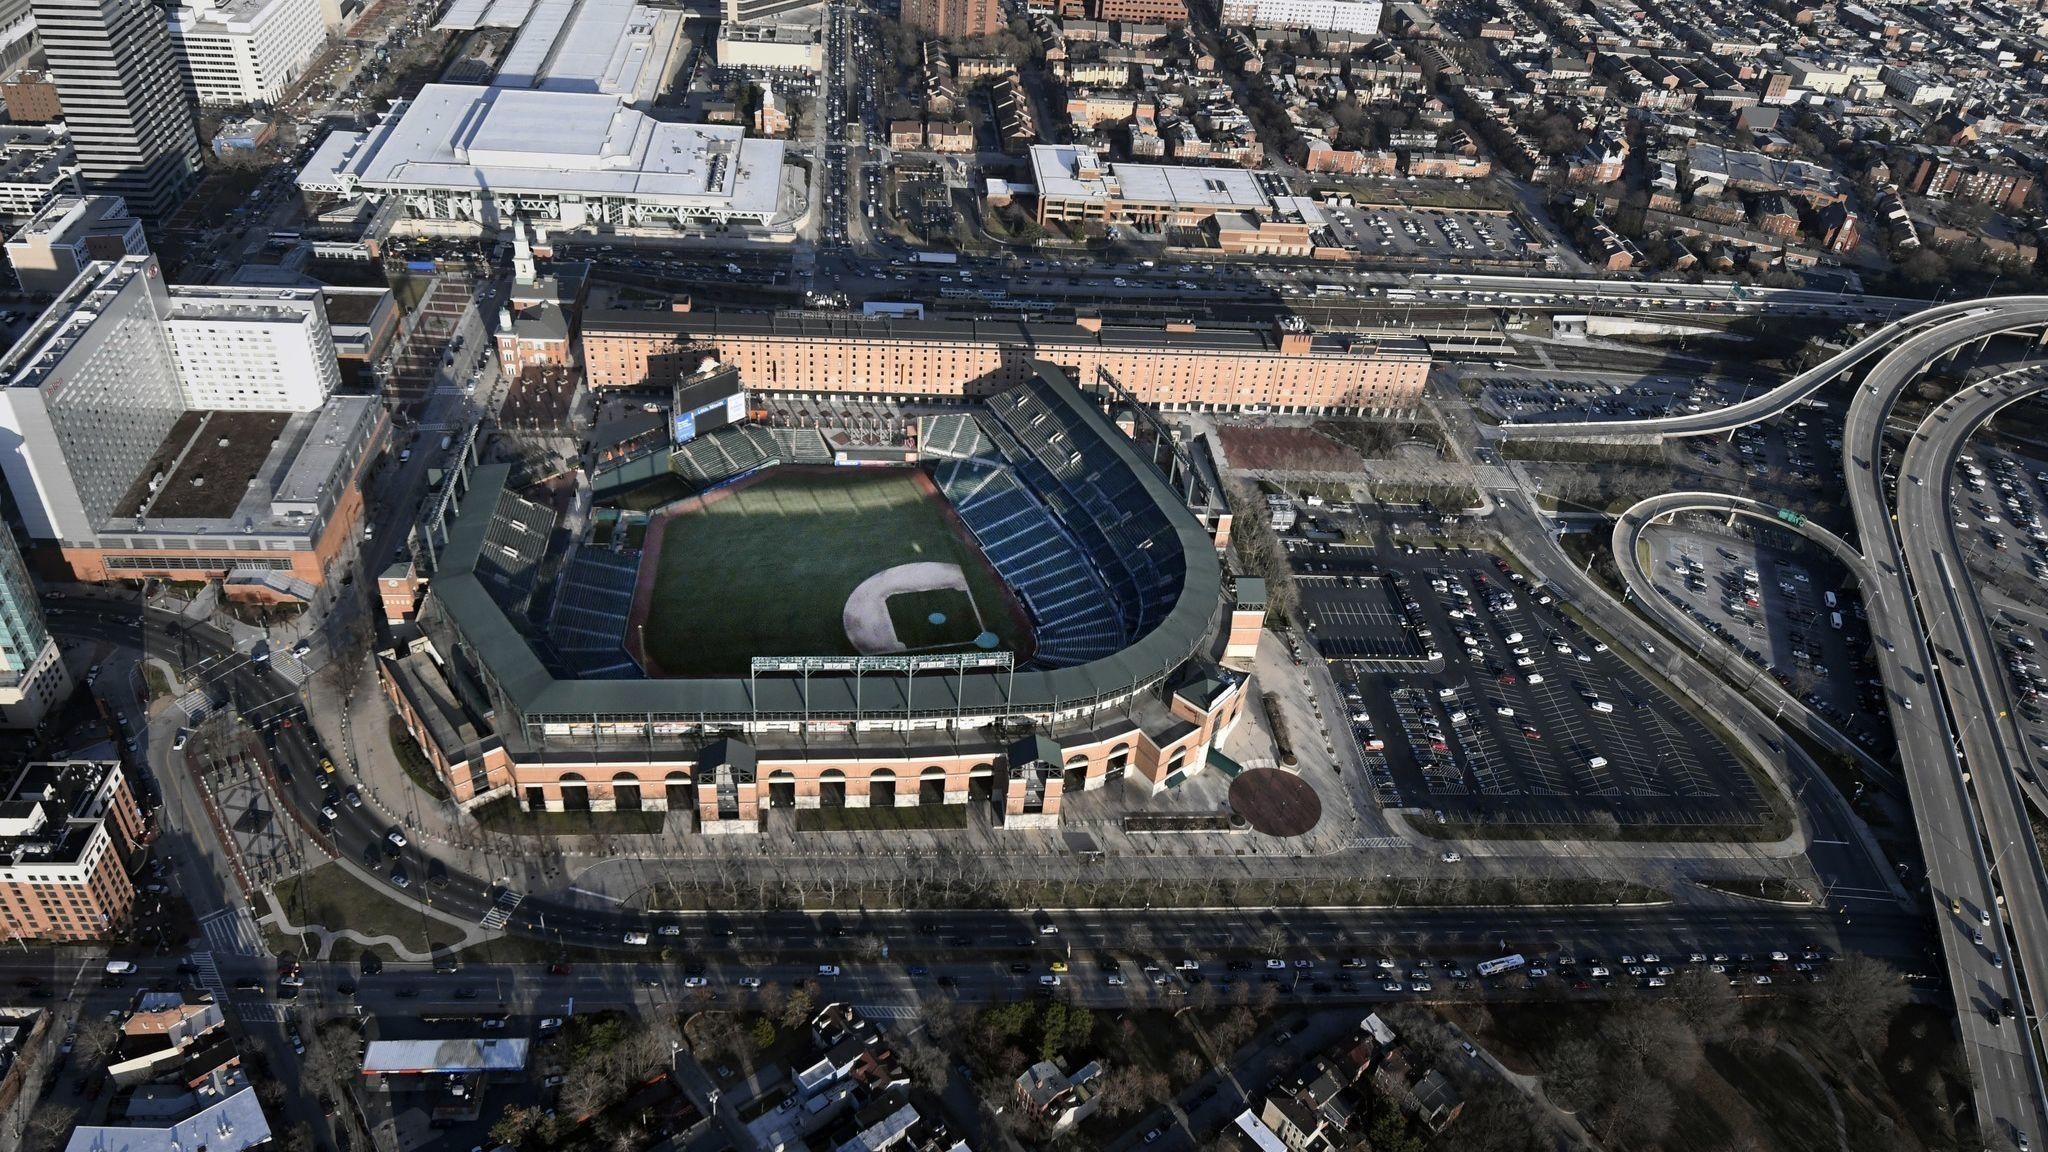 2048x1152 Wheelchair users file lawsuit over accessibility at Camden Yards, citing  broken lifts and blocked views